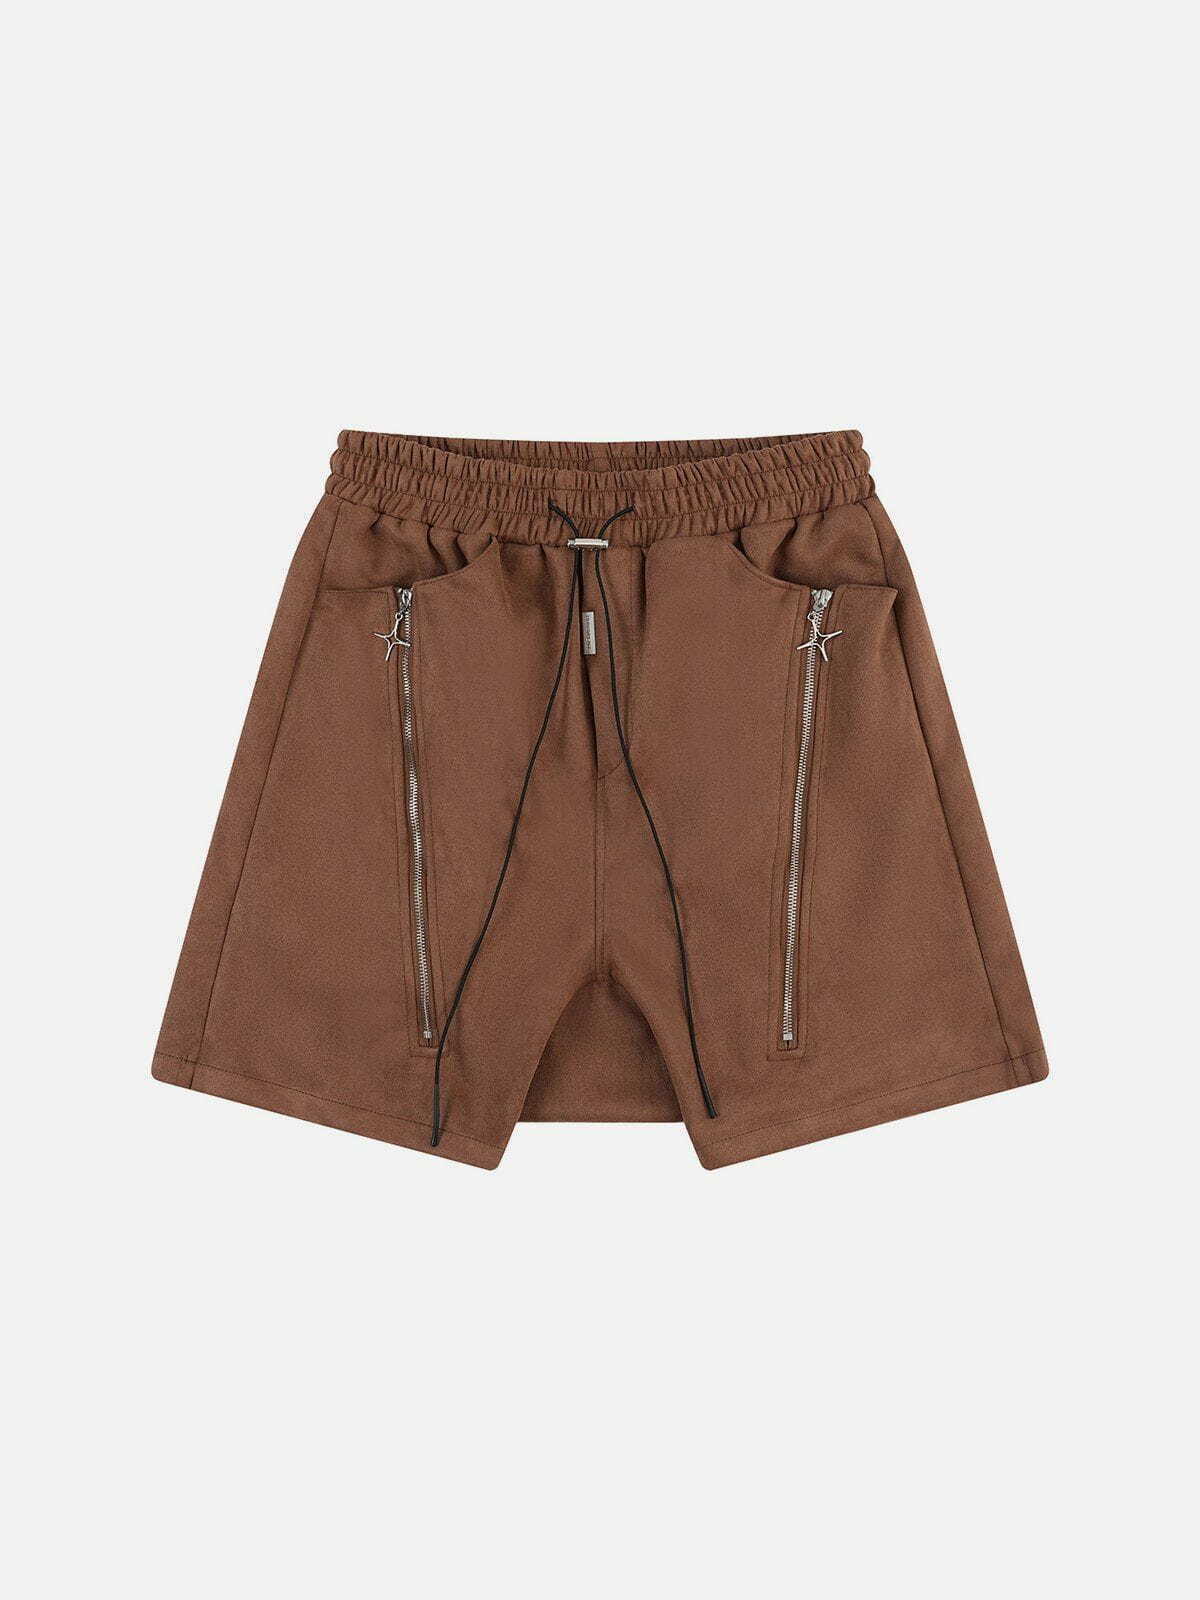 edgy suede shorts with star zipper   youthful streetwear 4959